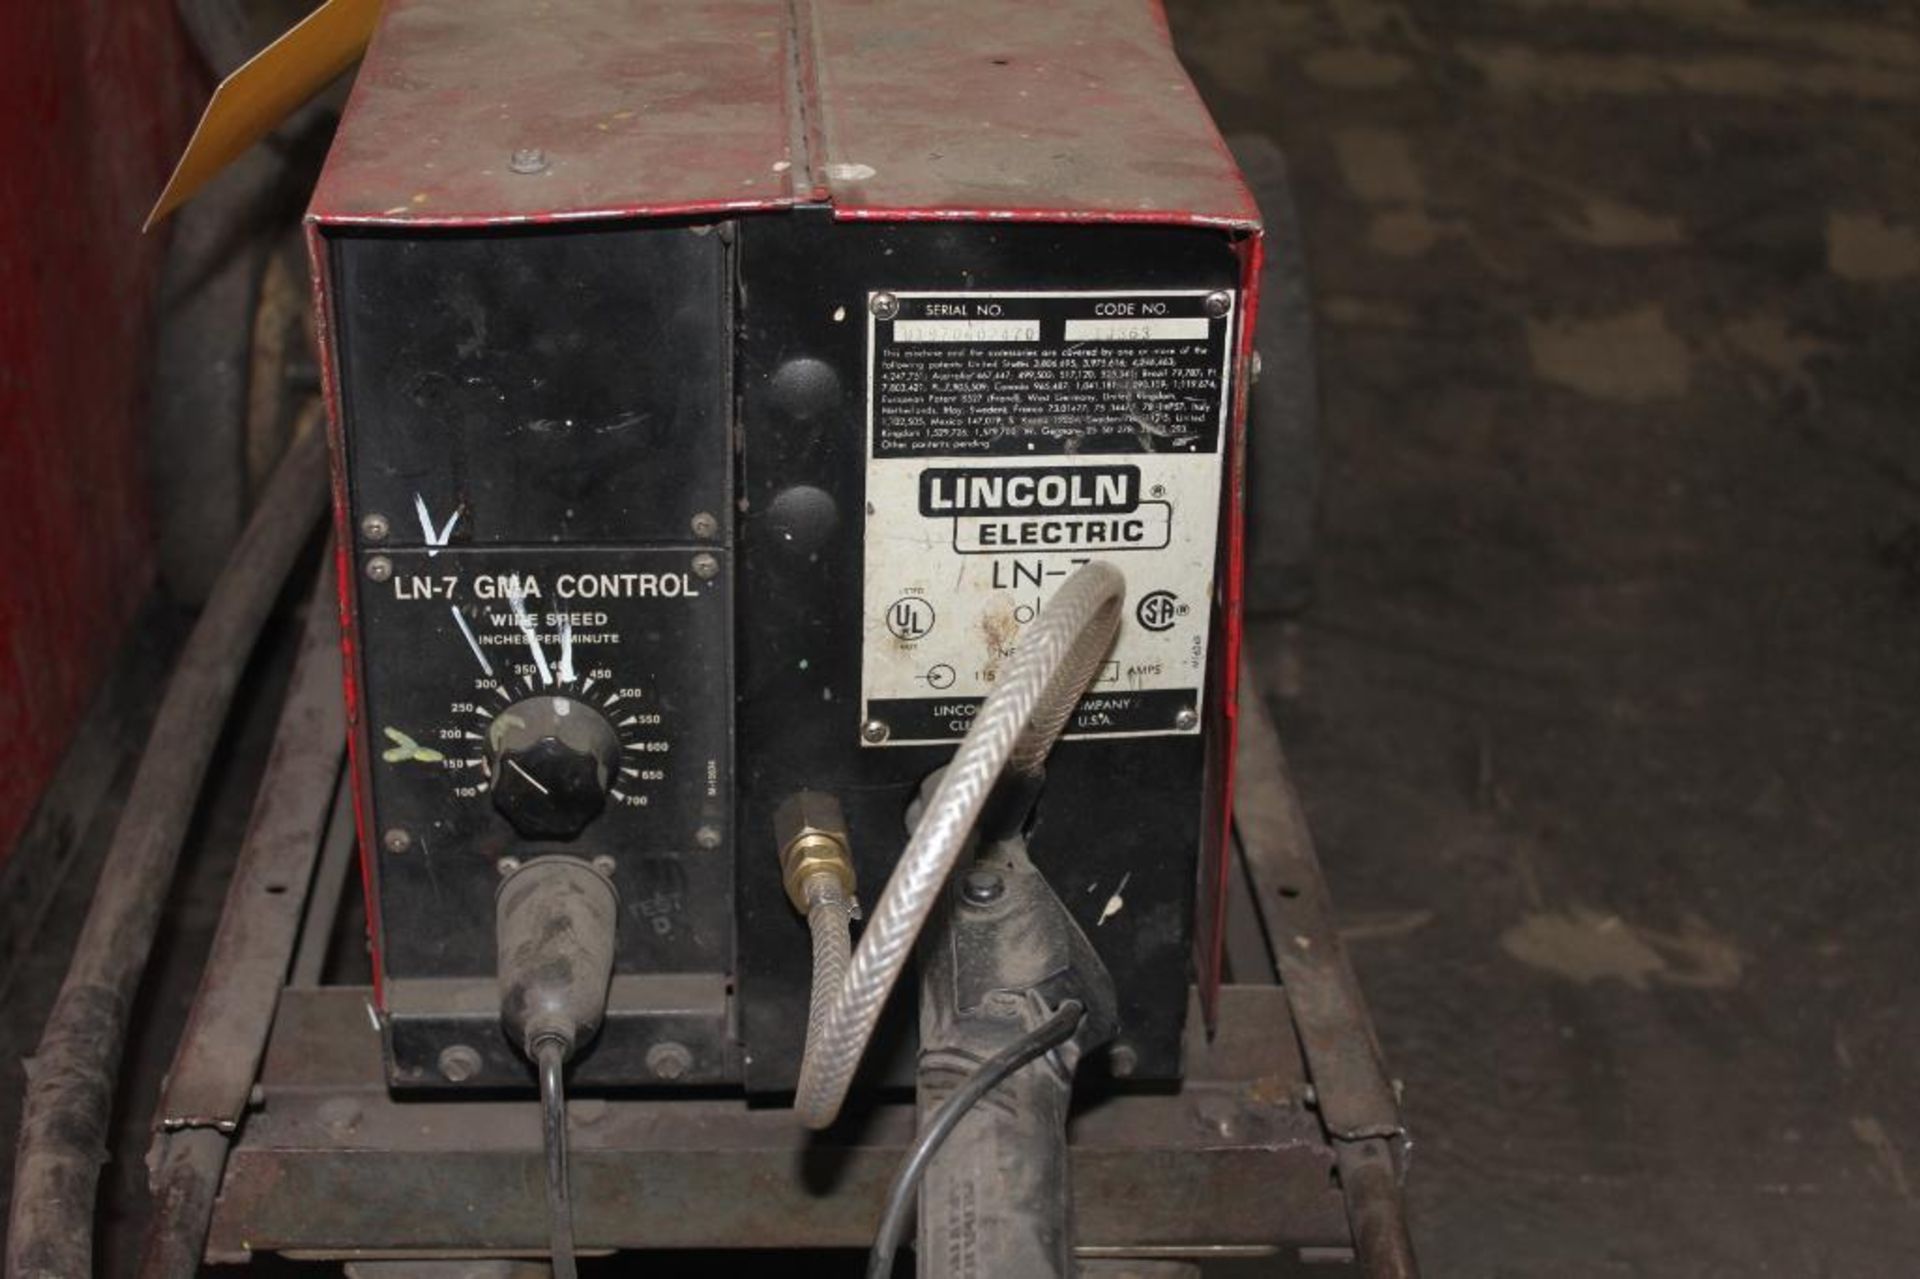 LINCOLN ELECTRIC IDEALARC DC-600 WELDER SN.U1091104152 230-460V WITH LN-7 WIRE FEED SN.U1970402470 - Image 5 of 10